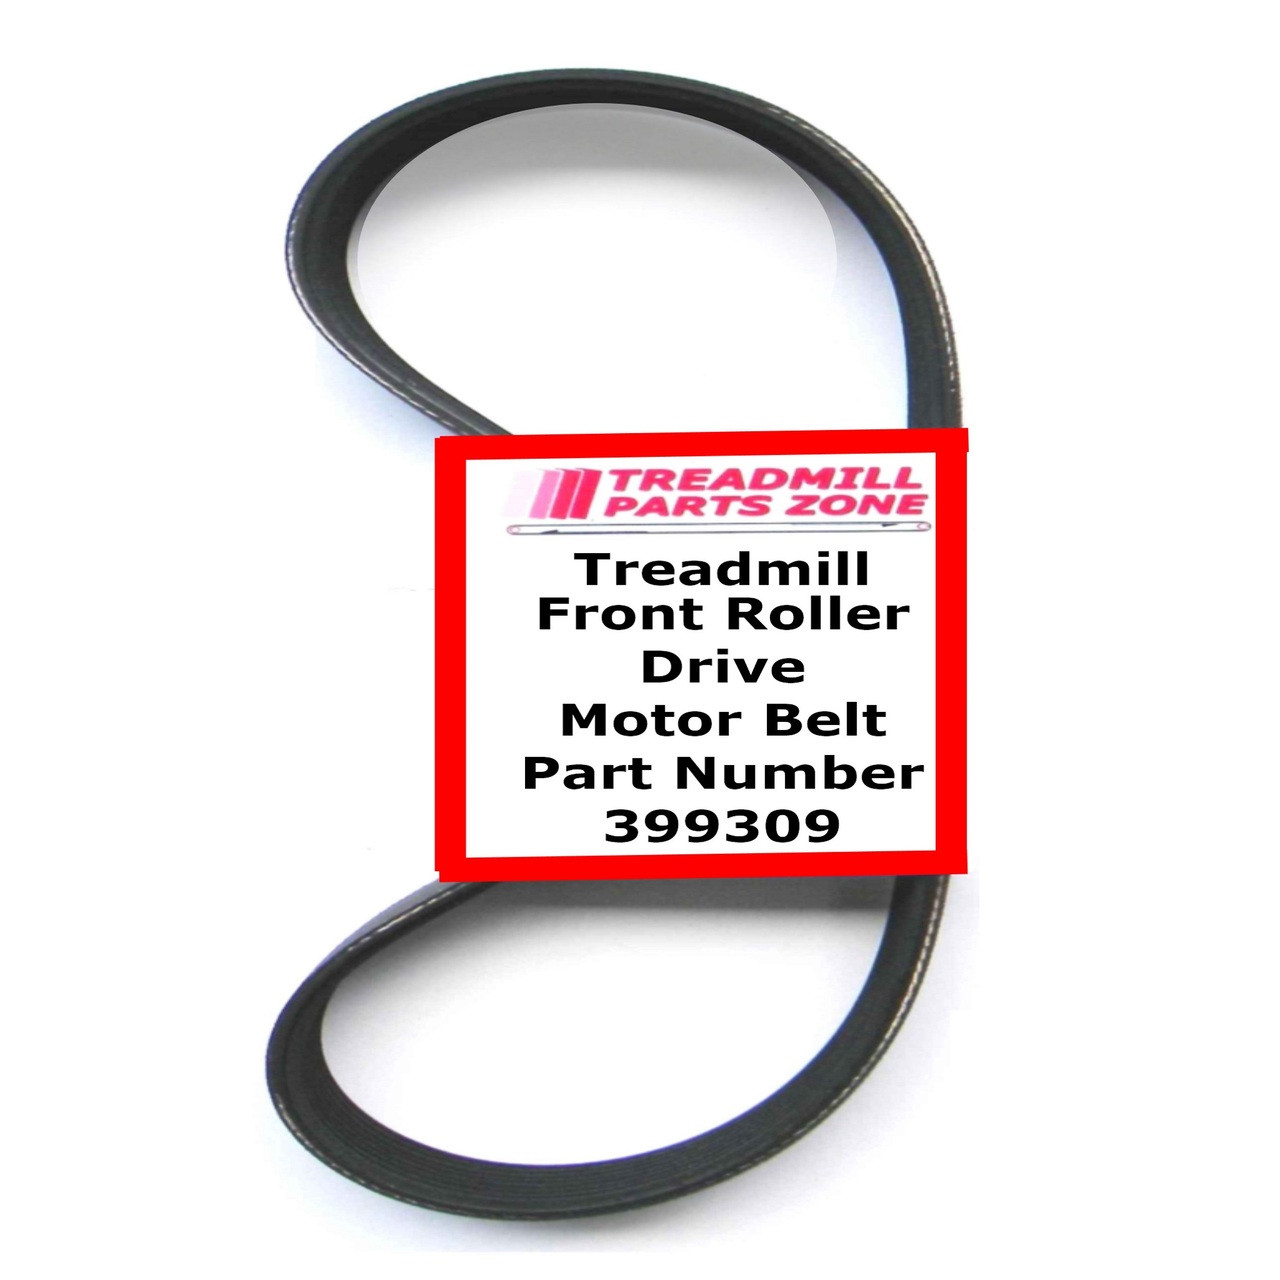 Golds Gym Treadmill Model GGTL59613.5 Drive Pulley Belt Part Number 399309